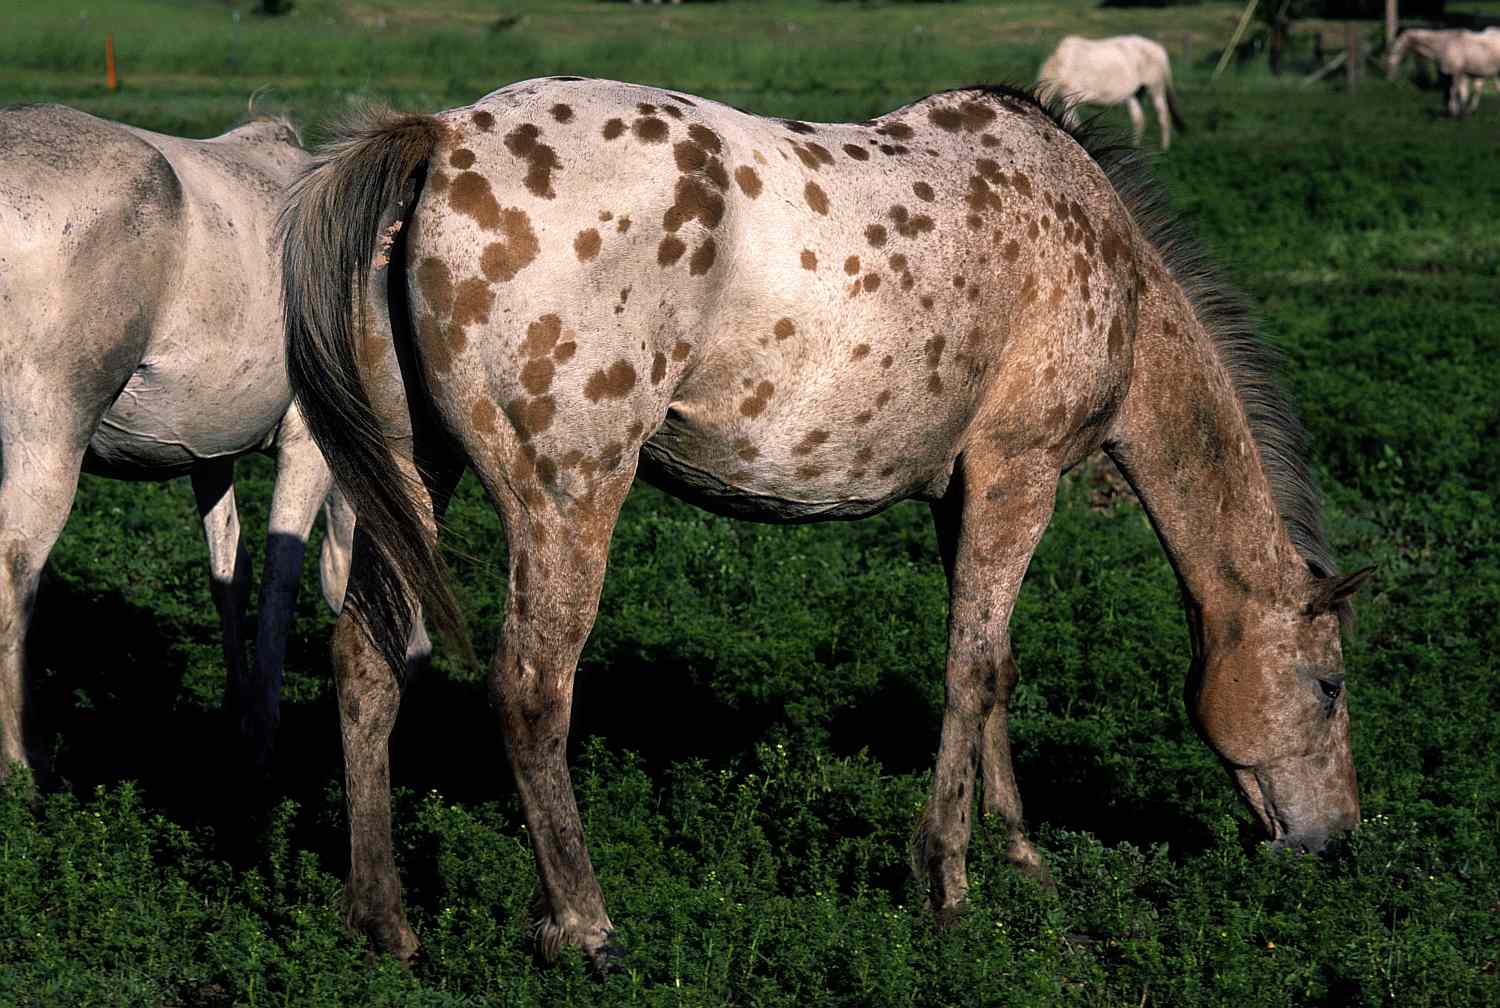 Appaloosa horses in a pasture